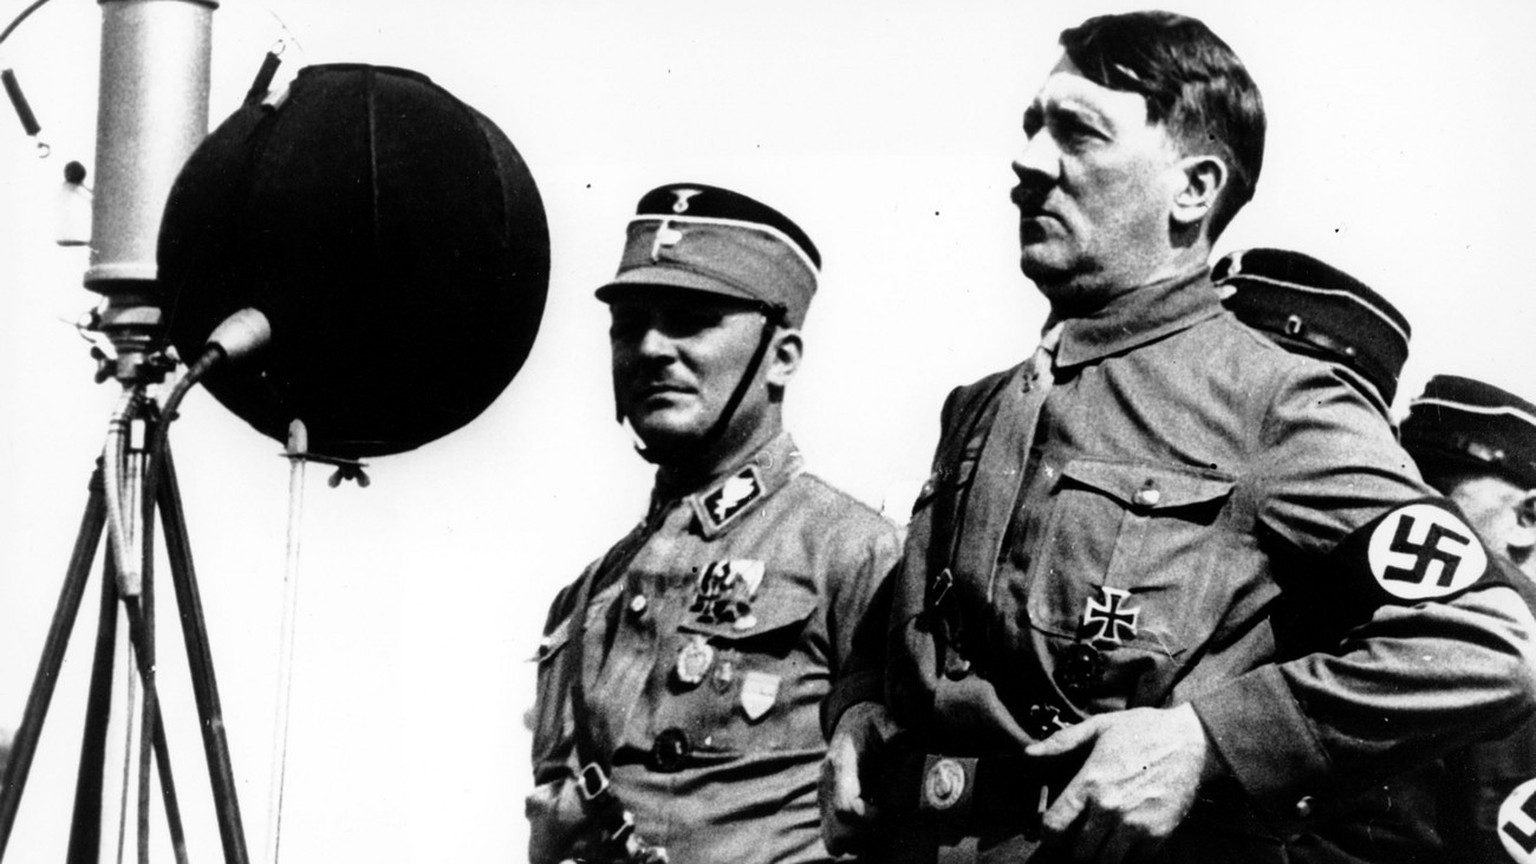 German chancellor Adolf Hitler speaks to 30,000 uniformed Nazi storm troopers at Kiel, Germany on May 7, 1933. He condemned the &quot;1918 traitors&quot; of World War I, accusing them of losing the wa ...